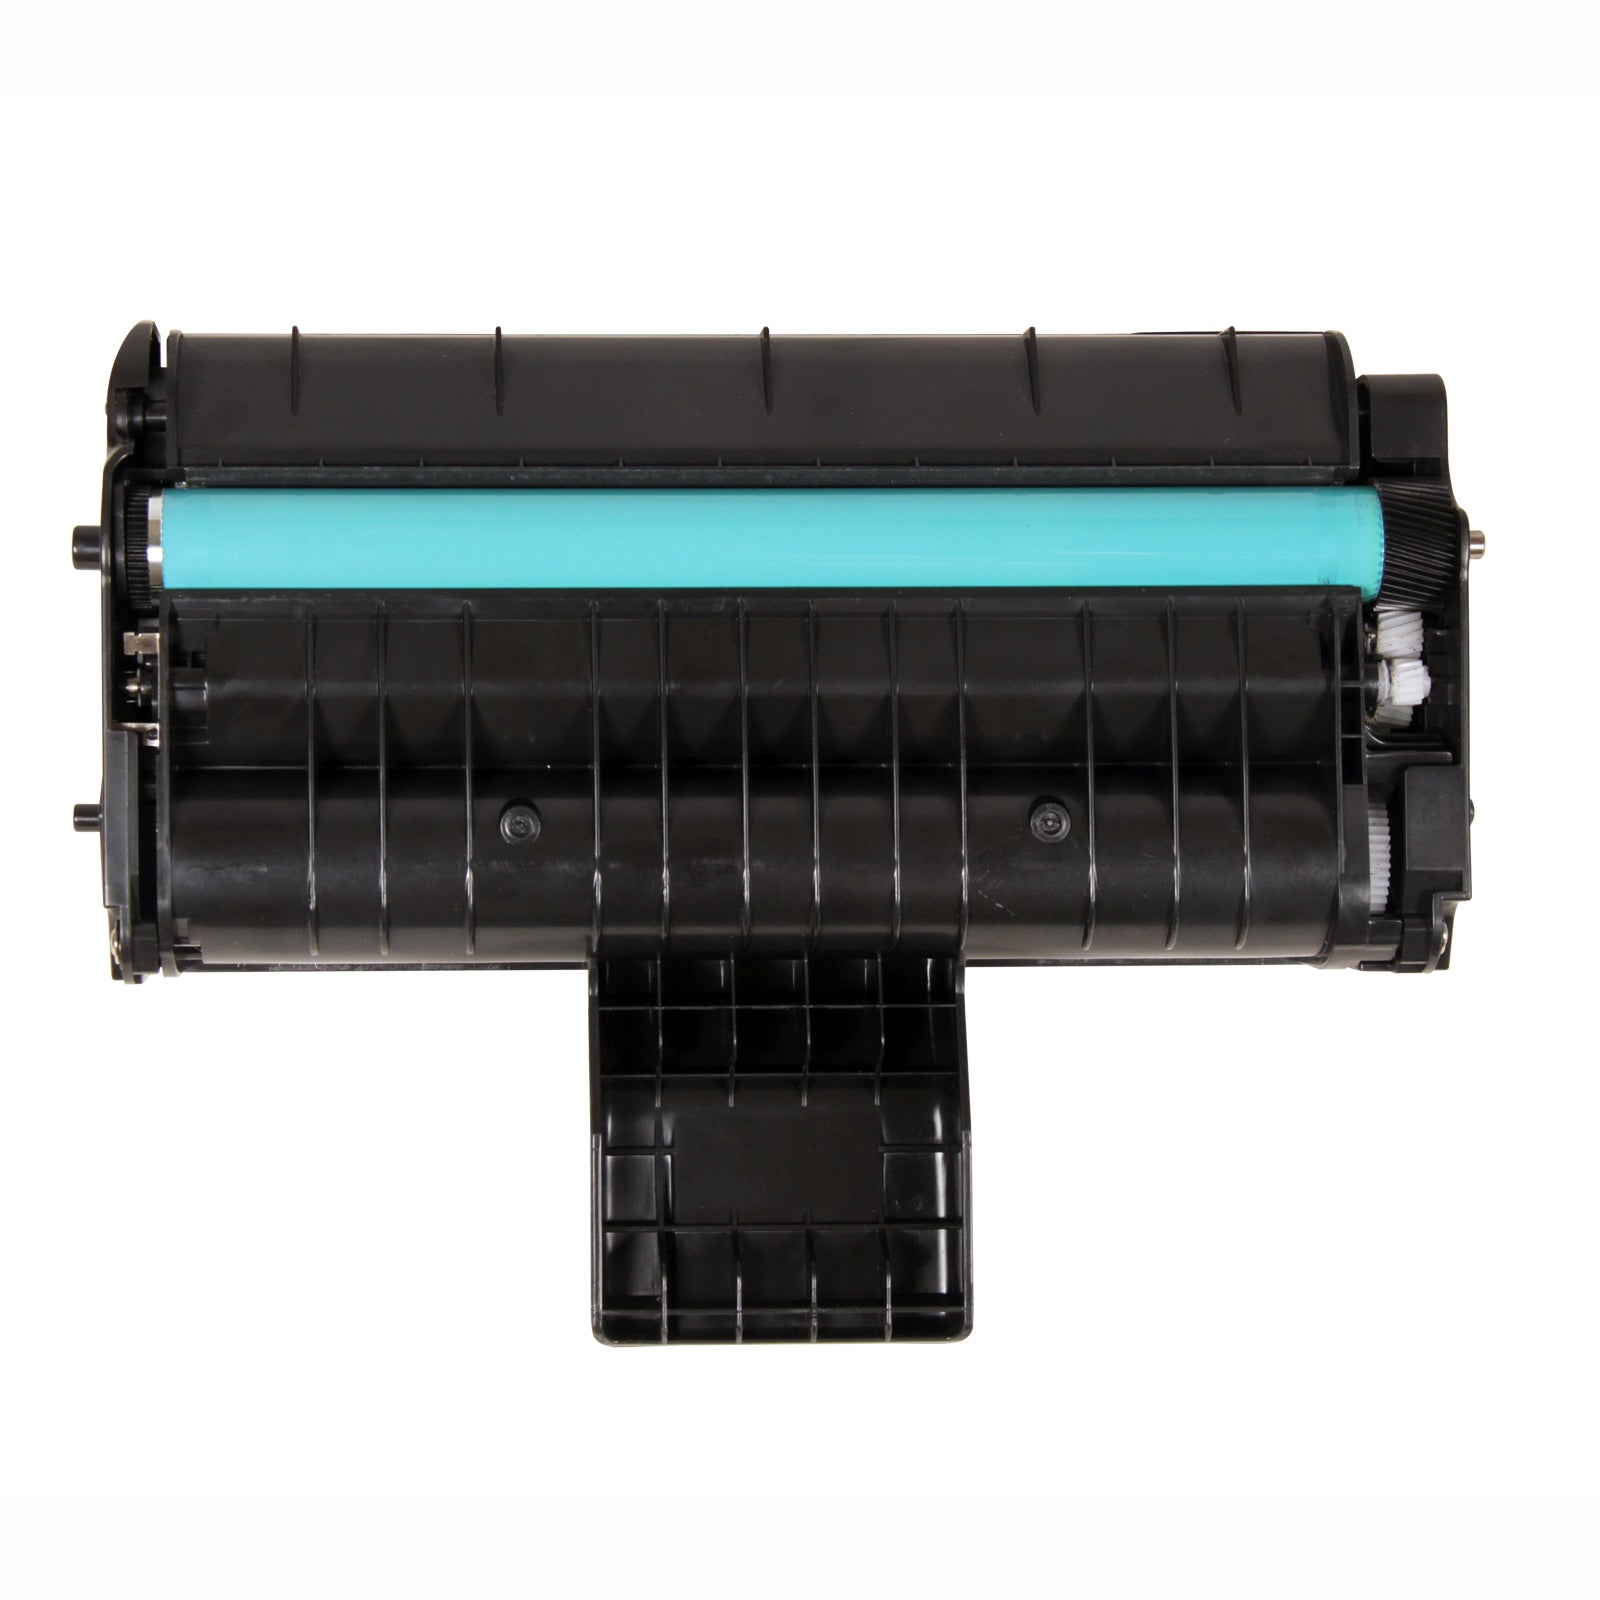 SKY Compatible toner Cartridge for  Ricoh SP201 and SP211  Printers 2600 pages